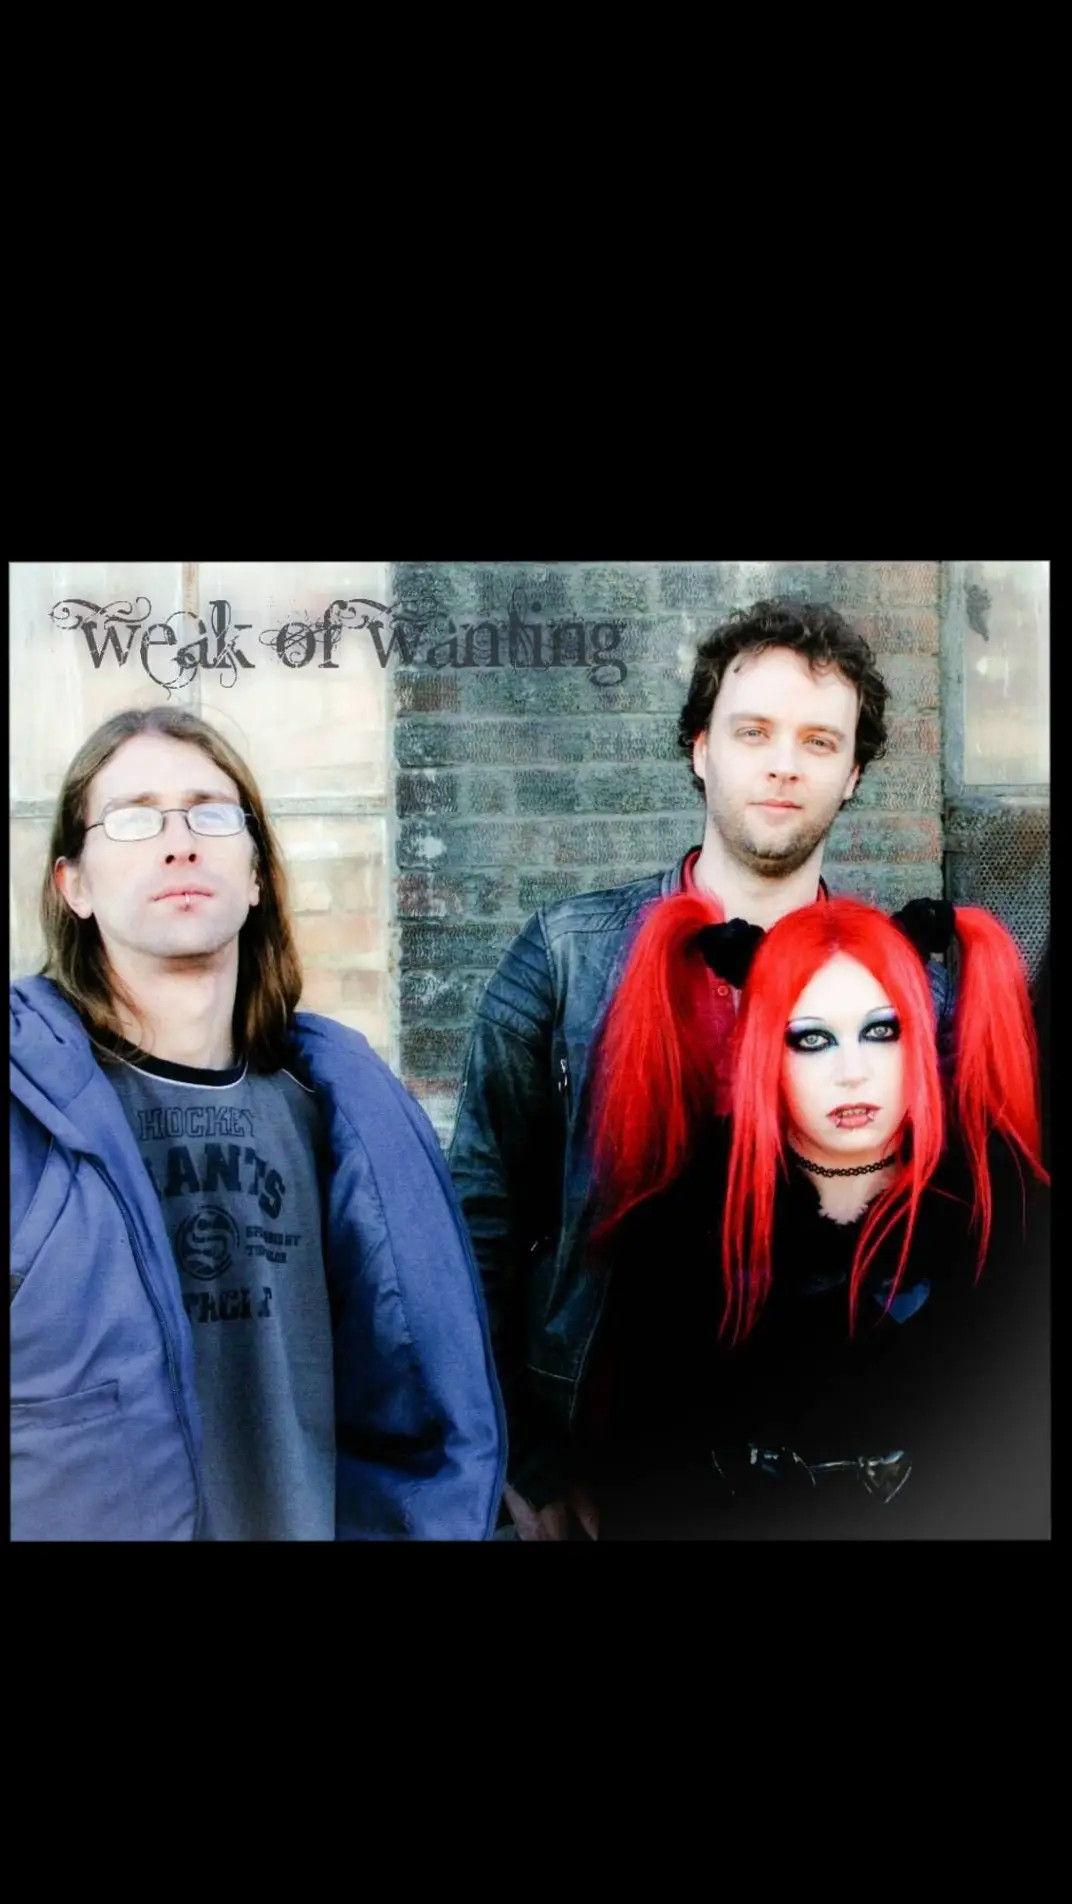 Heres another Birthday ... WEAK OF WANTING IS 14 YEARS OLD!!! 😝🤘 #weakofwanting #rock #grunge #metal #gothic #alternative #music #band #goth #fyp #foryou #foryoupage #foryourpage #merch #bandmerch #aesthetic #emo #dark #grungestyle #grungeaesthetic #gothicbeauty #altstyle #gothgirl #gothgrunge #grungemodel #gothmodel #egirl #gothaesthetic #viral #video  